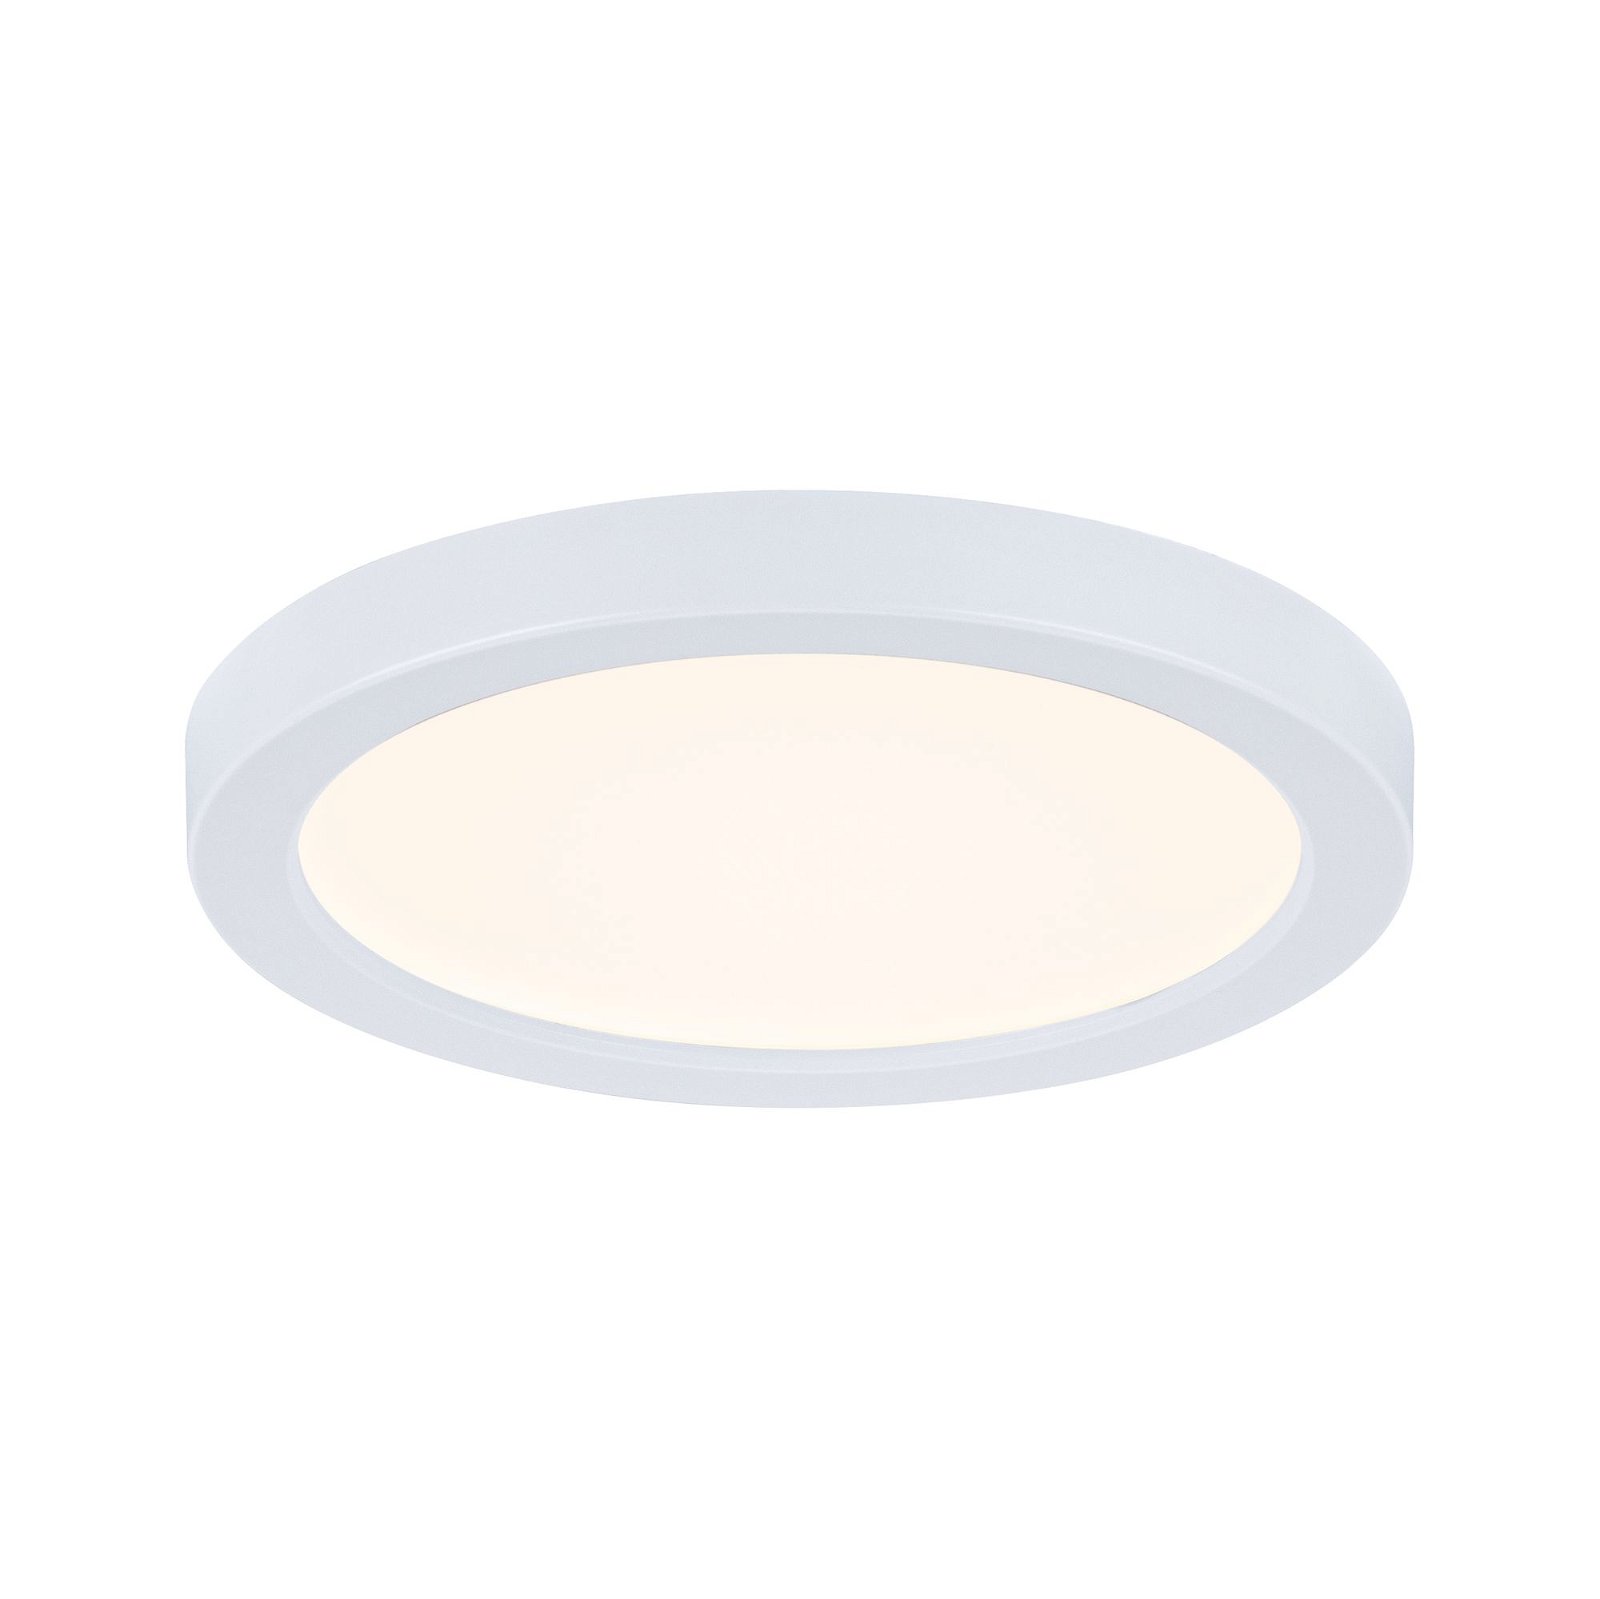 VariFit LED-inbouwpaneel Dim to Warm Areo IP44 rond 118mm 3000K Wit